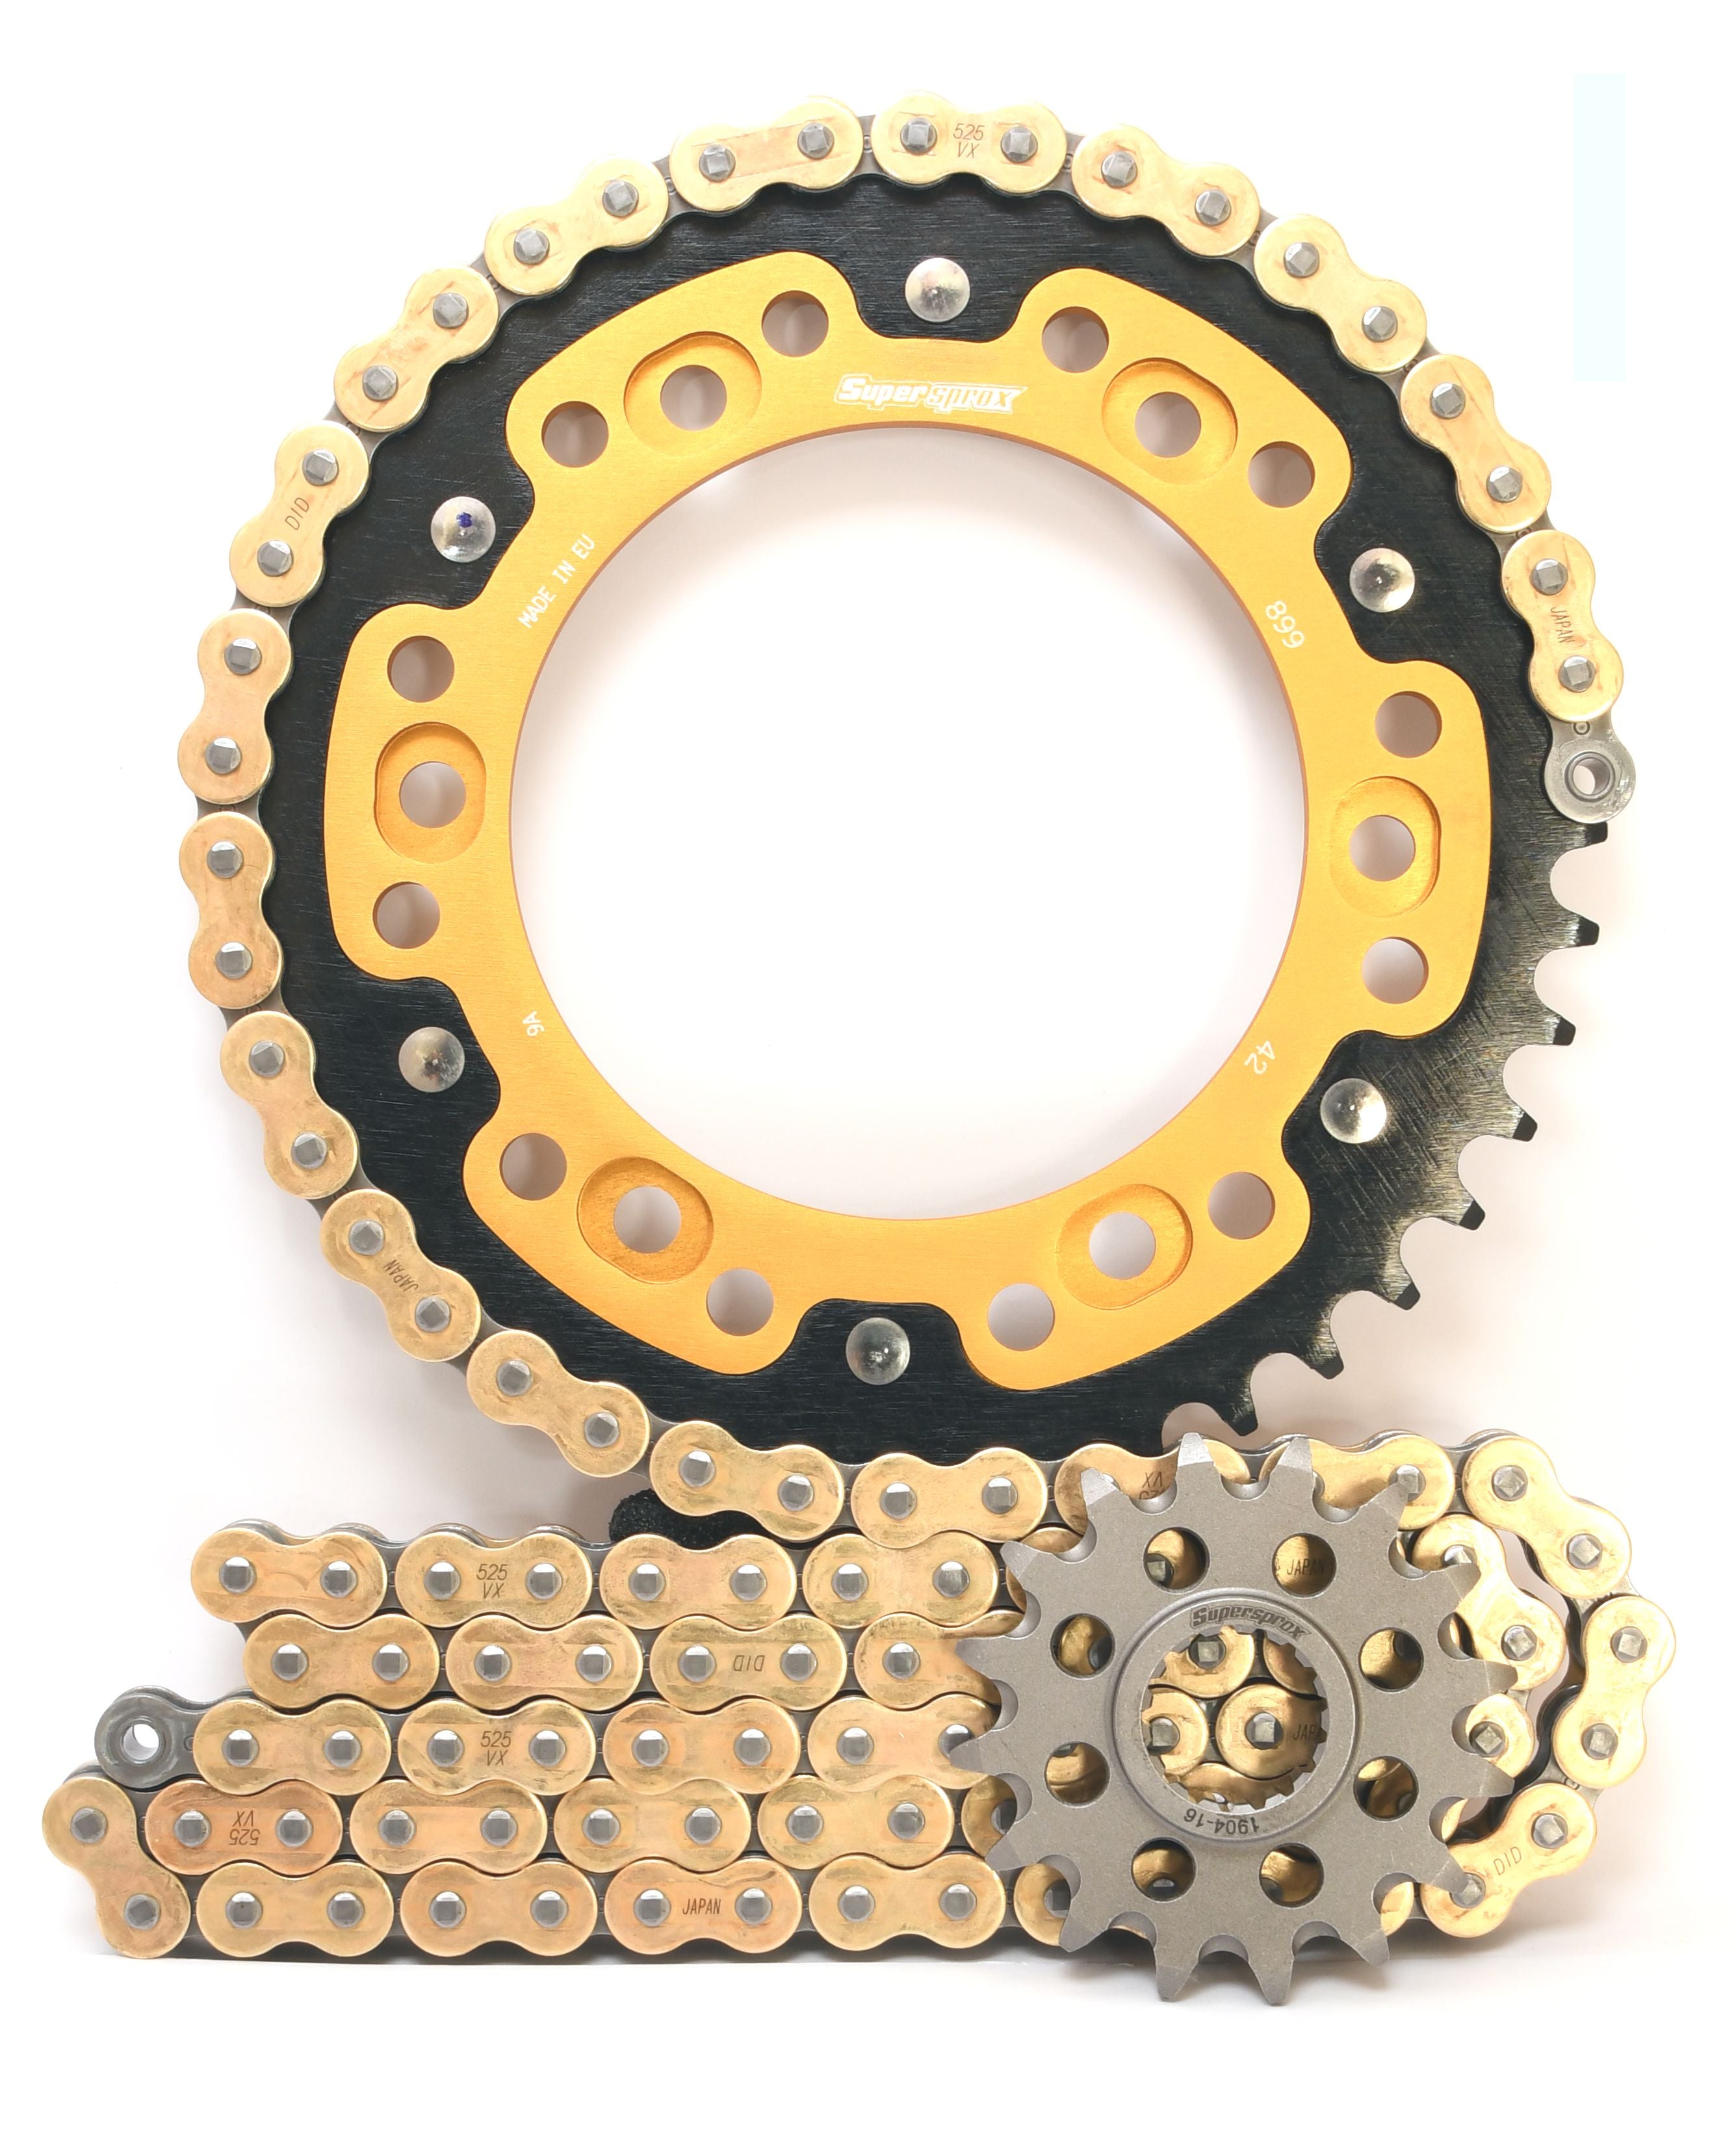 Supersprox Chain & Sprocket Kit for KTM Adventure - Choose Your Gearing